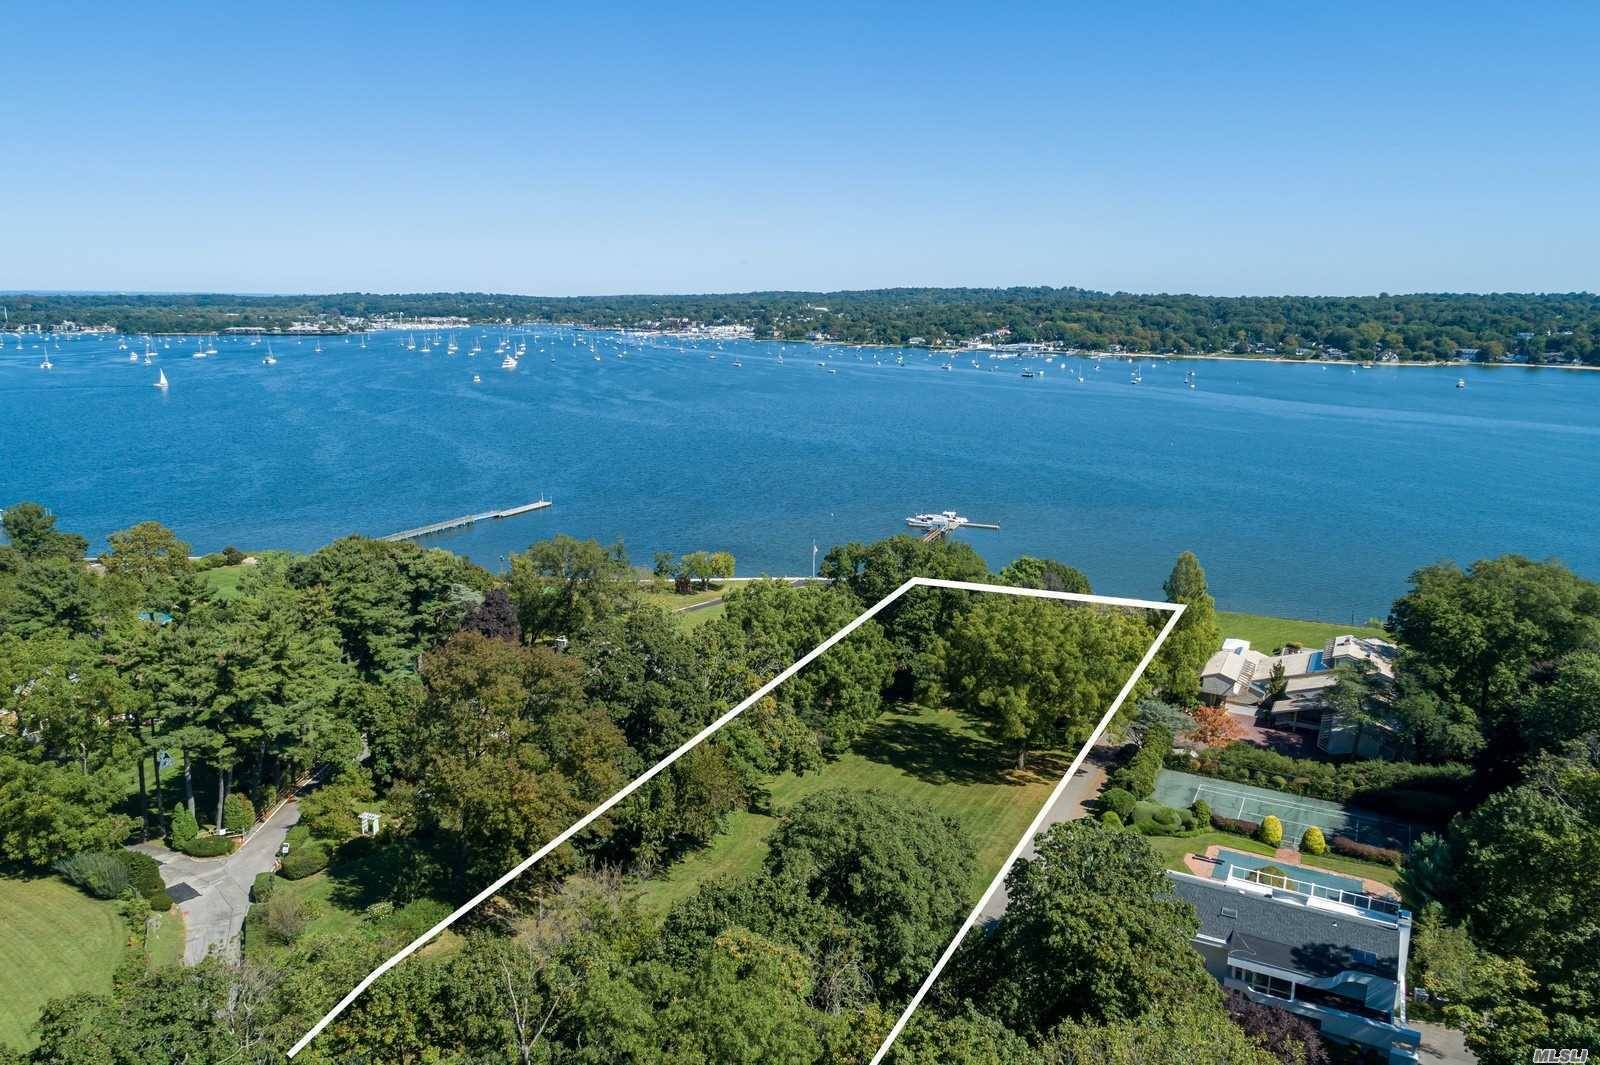 Breathtaking Unobstructed Panoramic View of Manhasset Bay, Exquisite in Everyway.